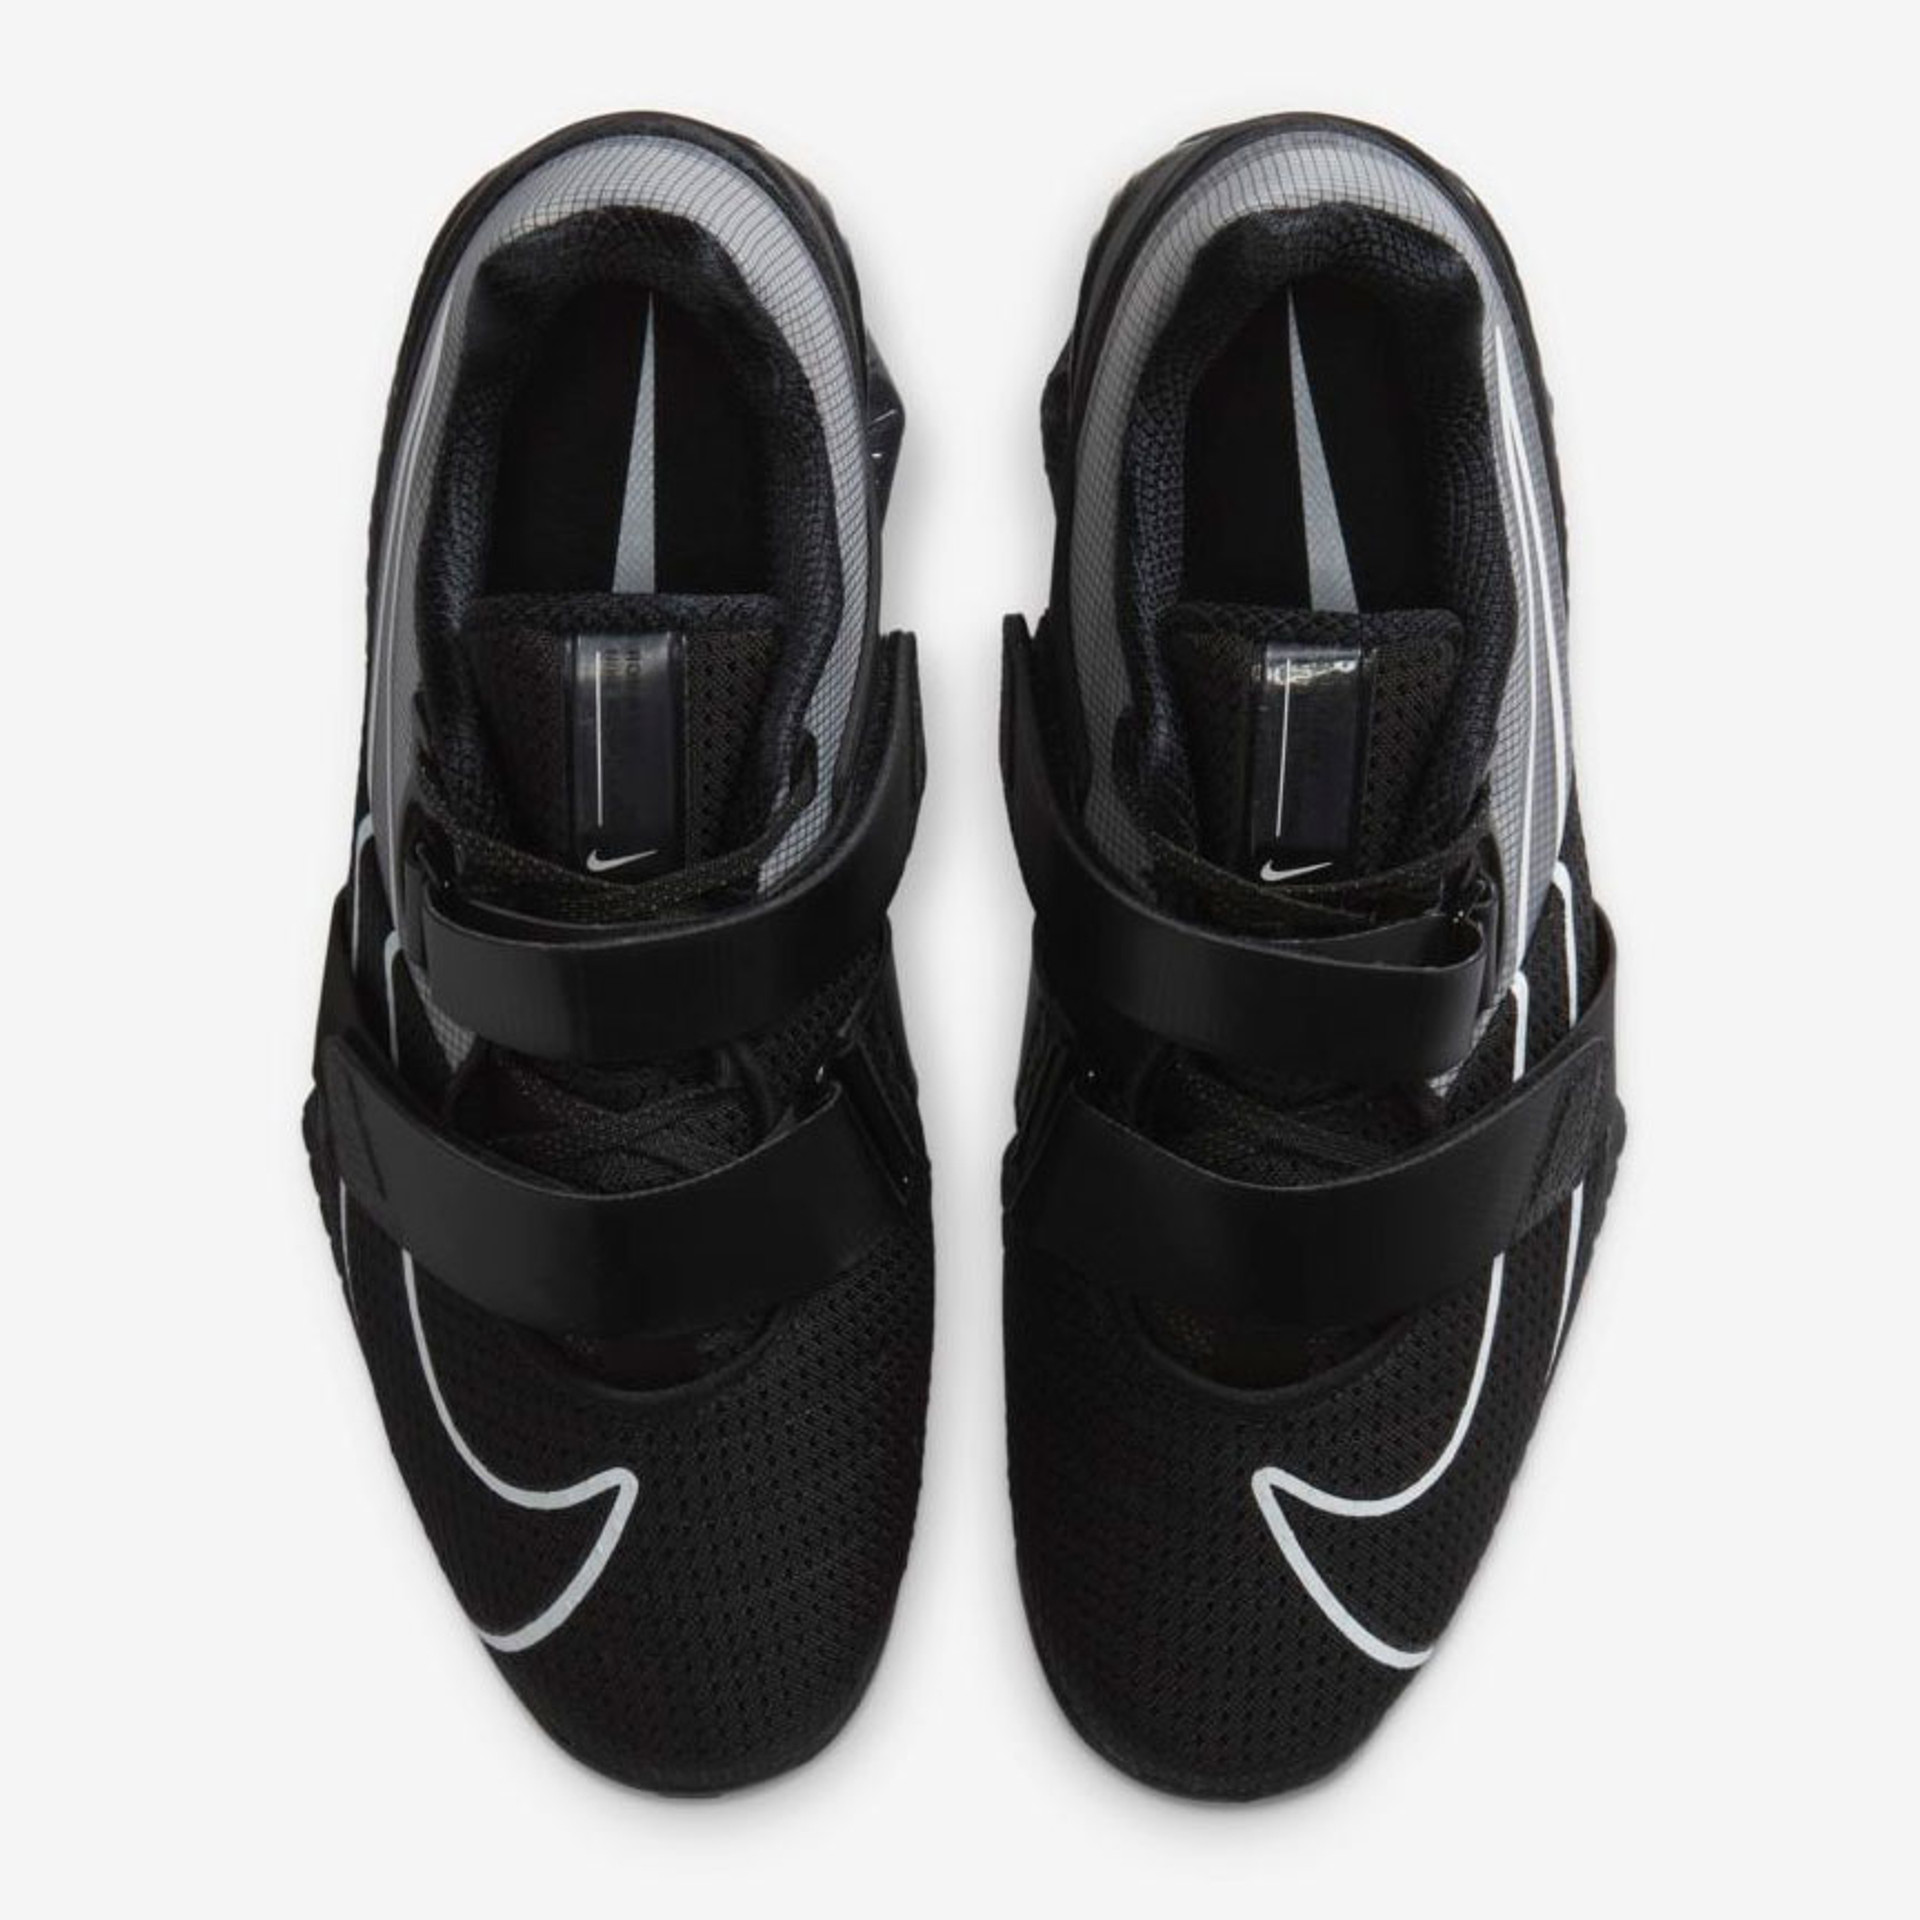 Nike Romaleos 4 Weightlifting Shoes (Multiple Colors)